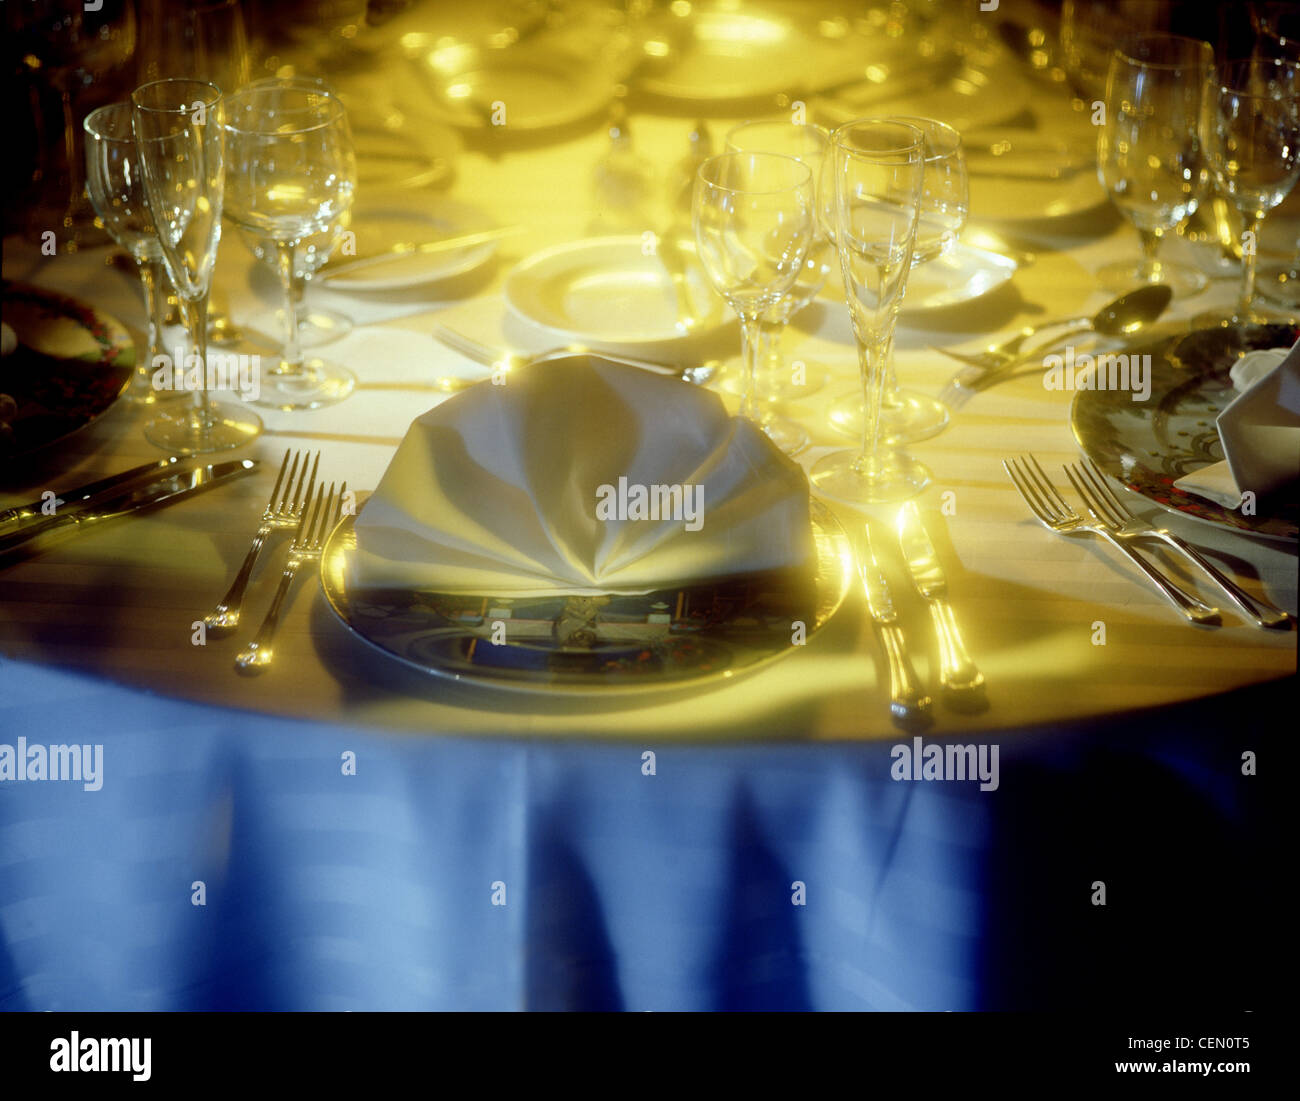 Banquet table setting with dramatic light.  Plate with fanned napkin is center of frame. Empty plates, no food. Stock Photo